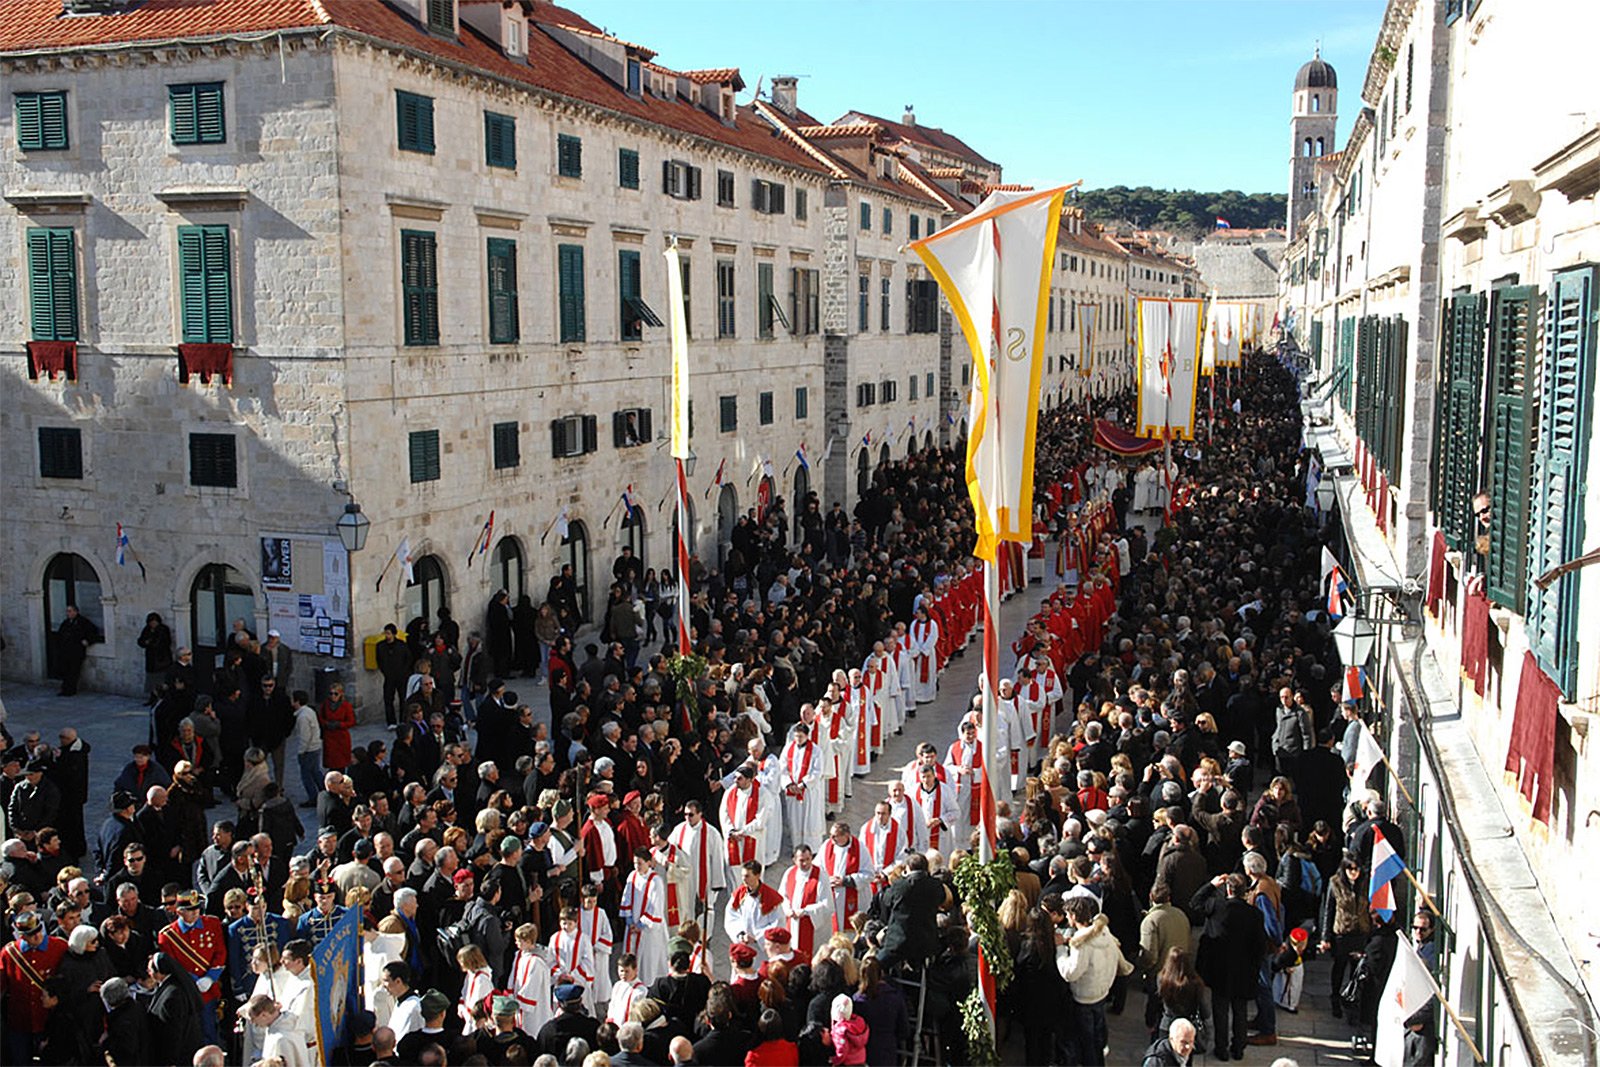 How to visit the Festivity of Saint Blaise in Dubrovnik